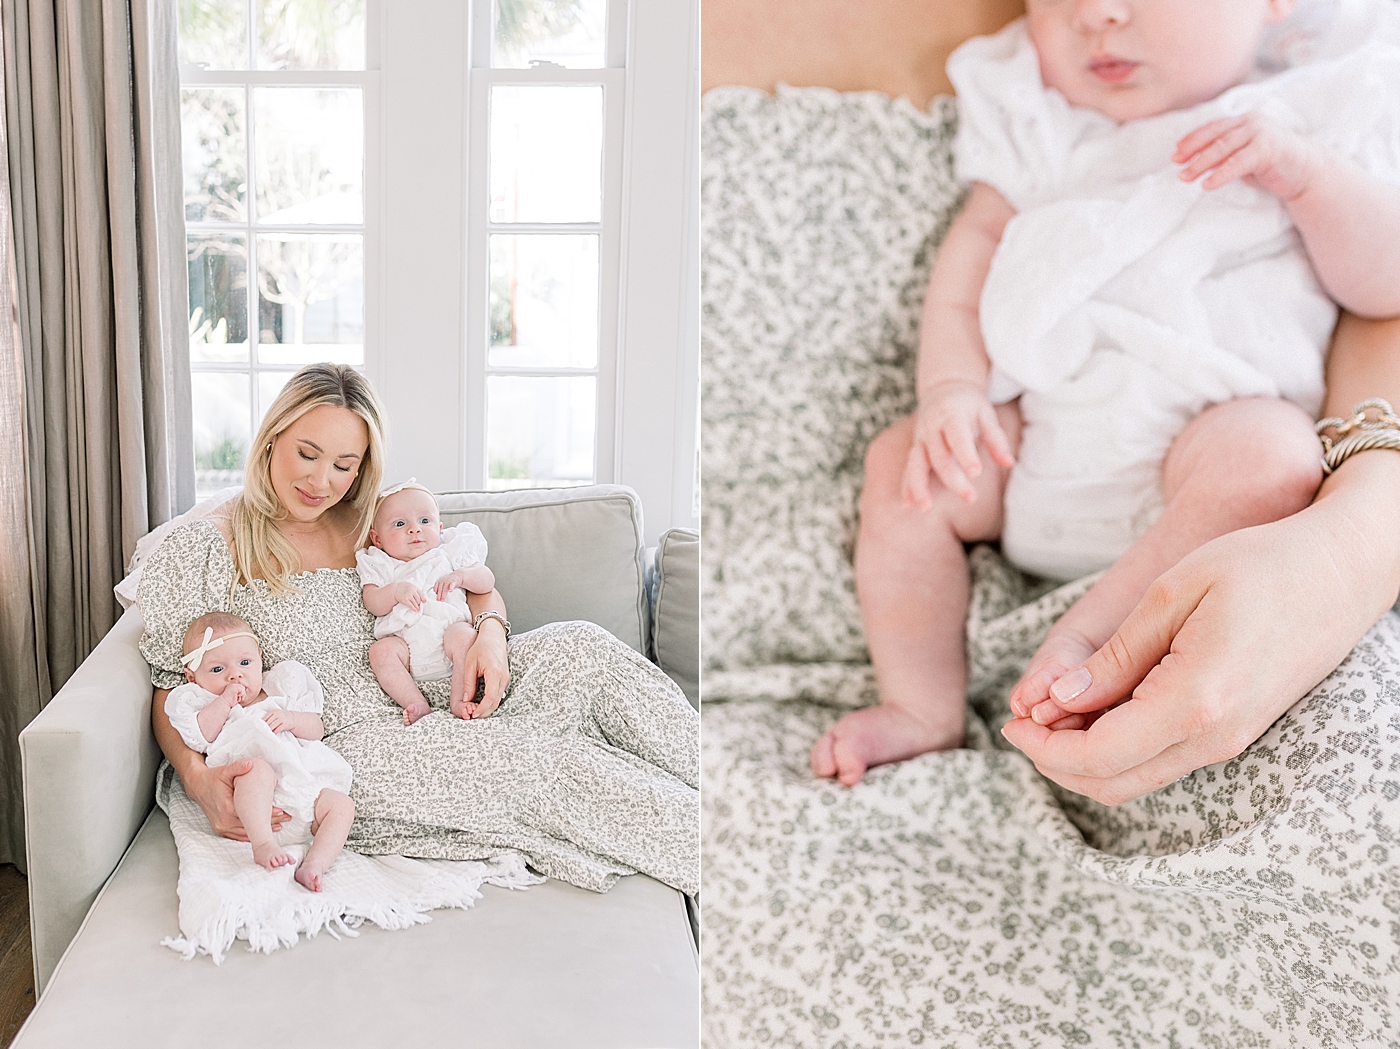 Side by side images of a mother holding her twins on a sofa in a soft, neutral room and a detail of the mother holding a baby's foot | Image by Caitlyn Motycka 